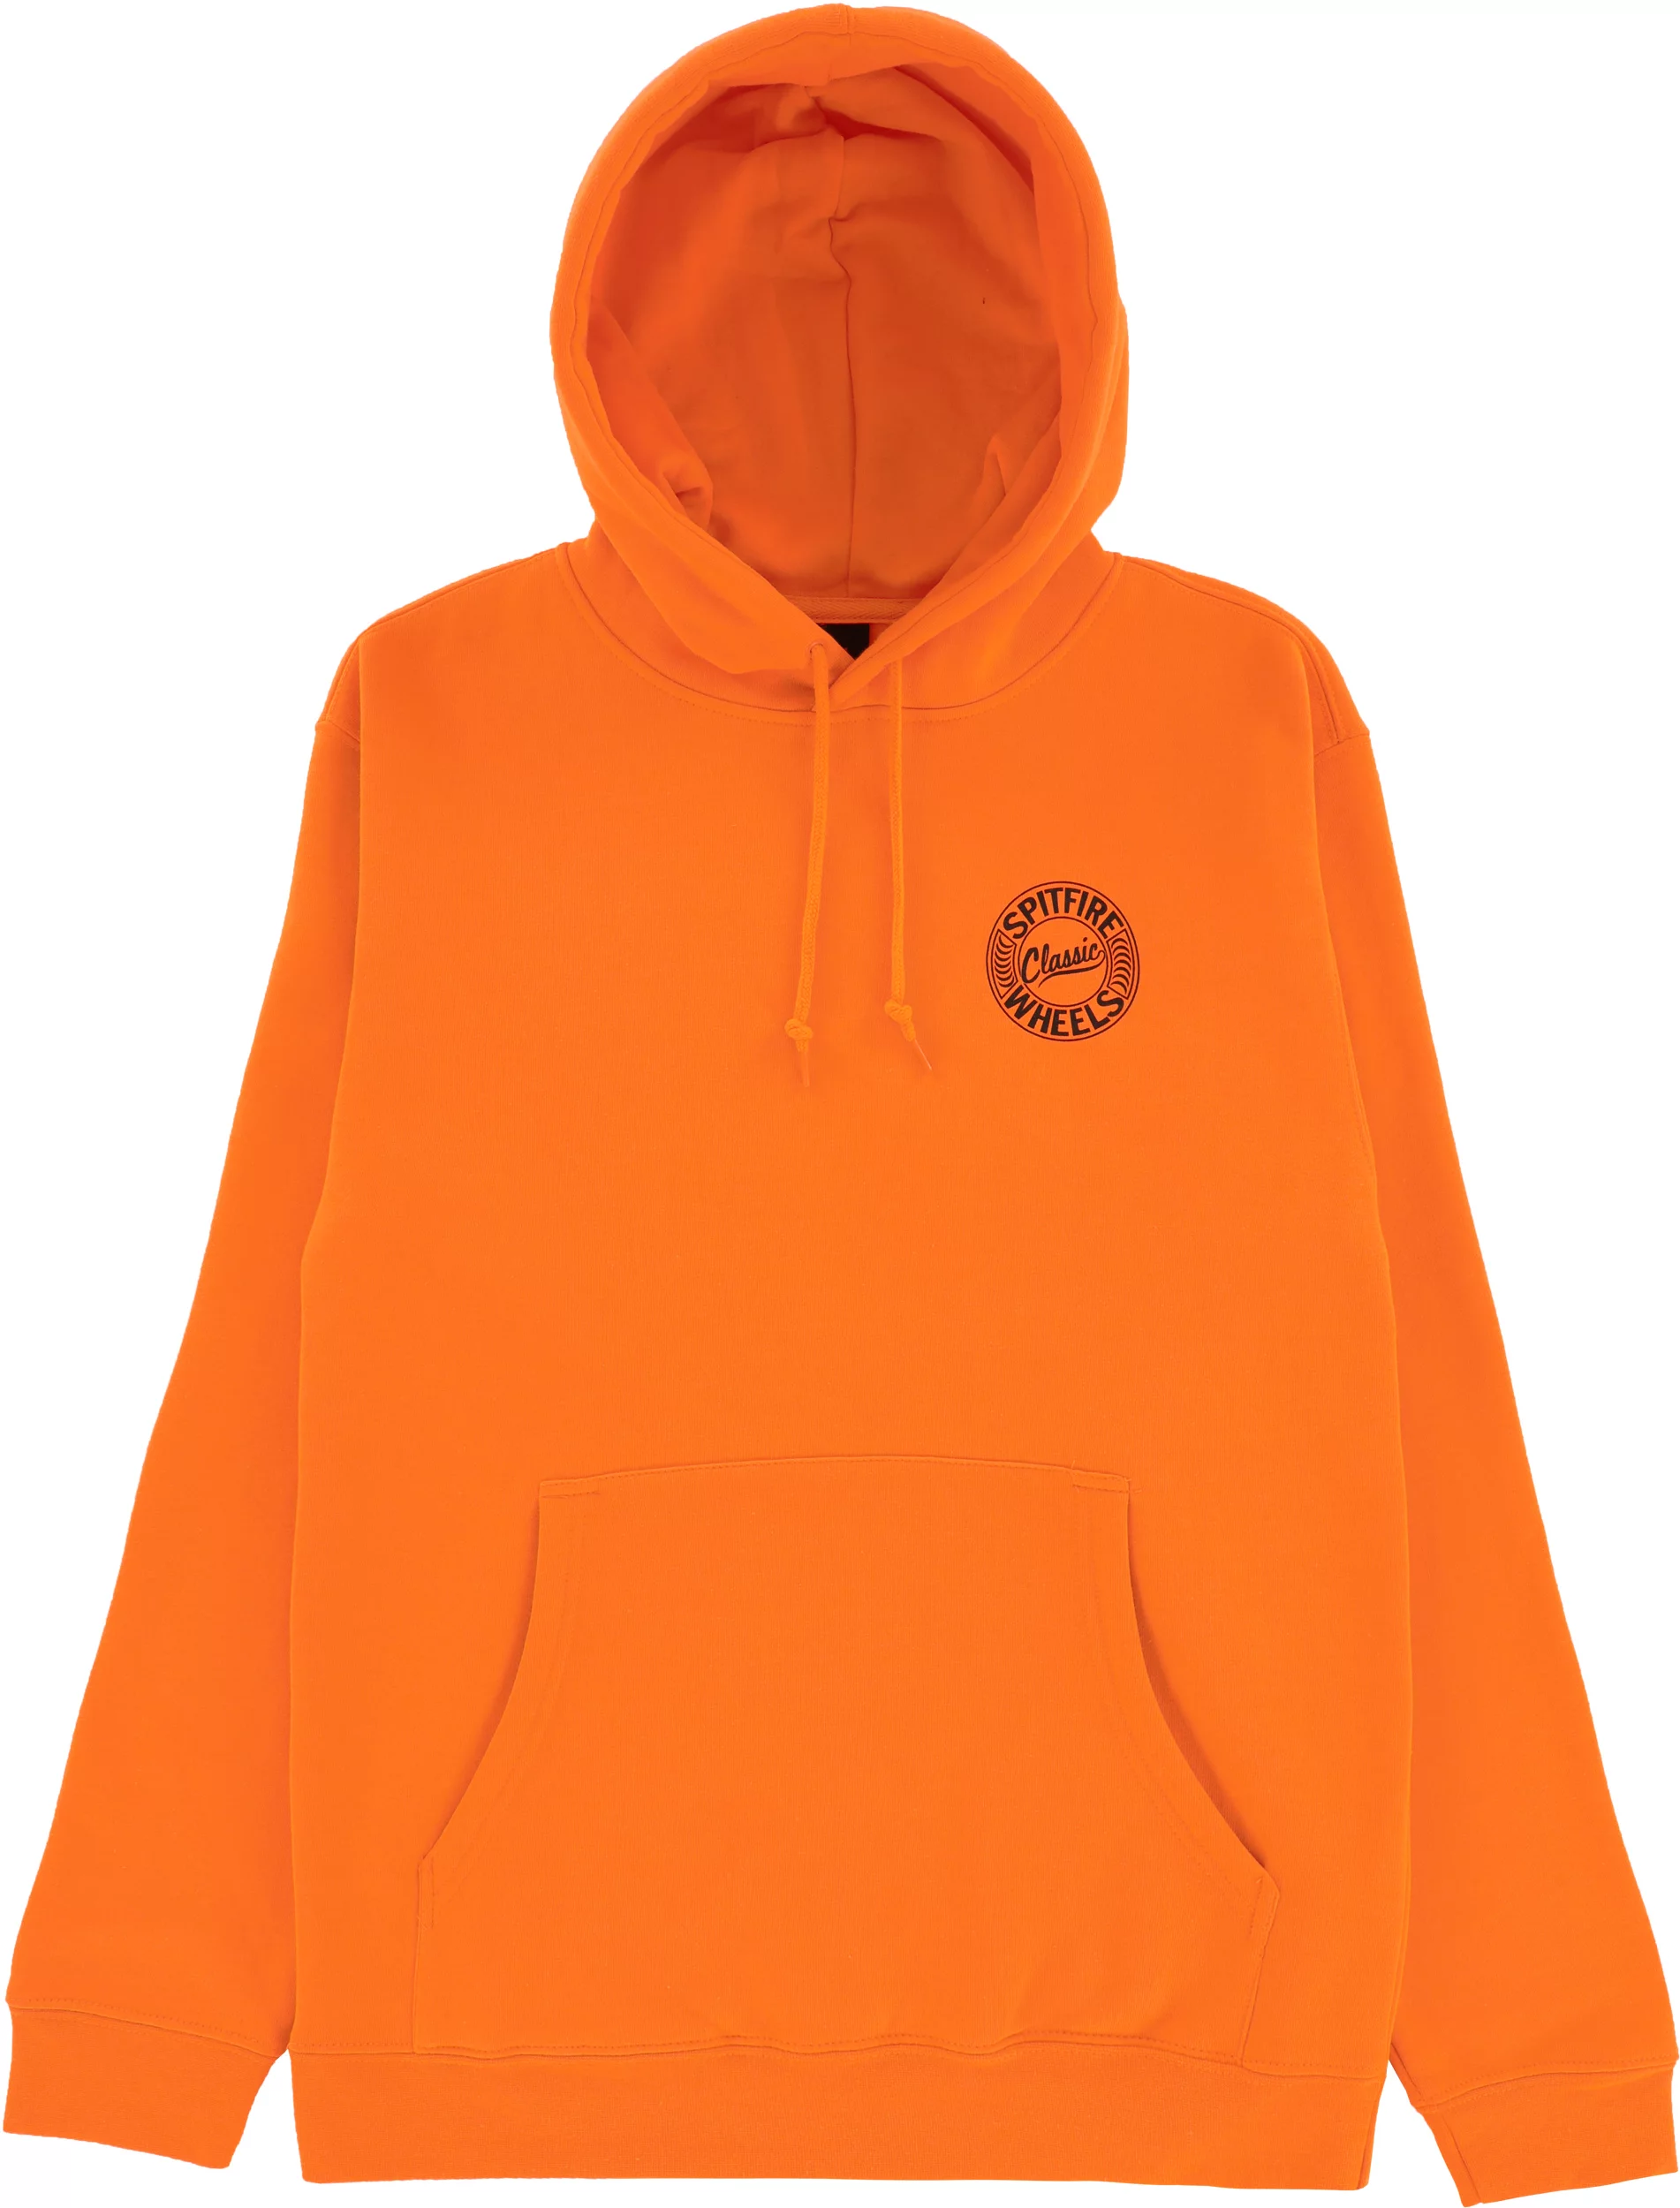 Spitfire Flying Classic Hoodie orange safety Neon - Tactics 